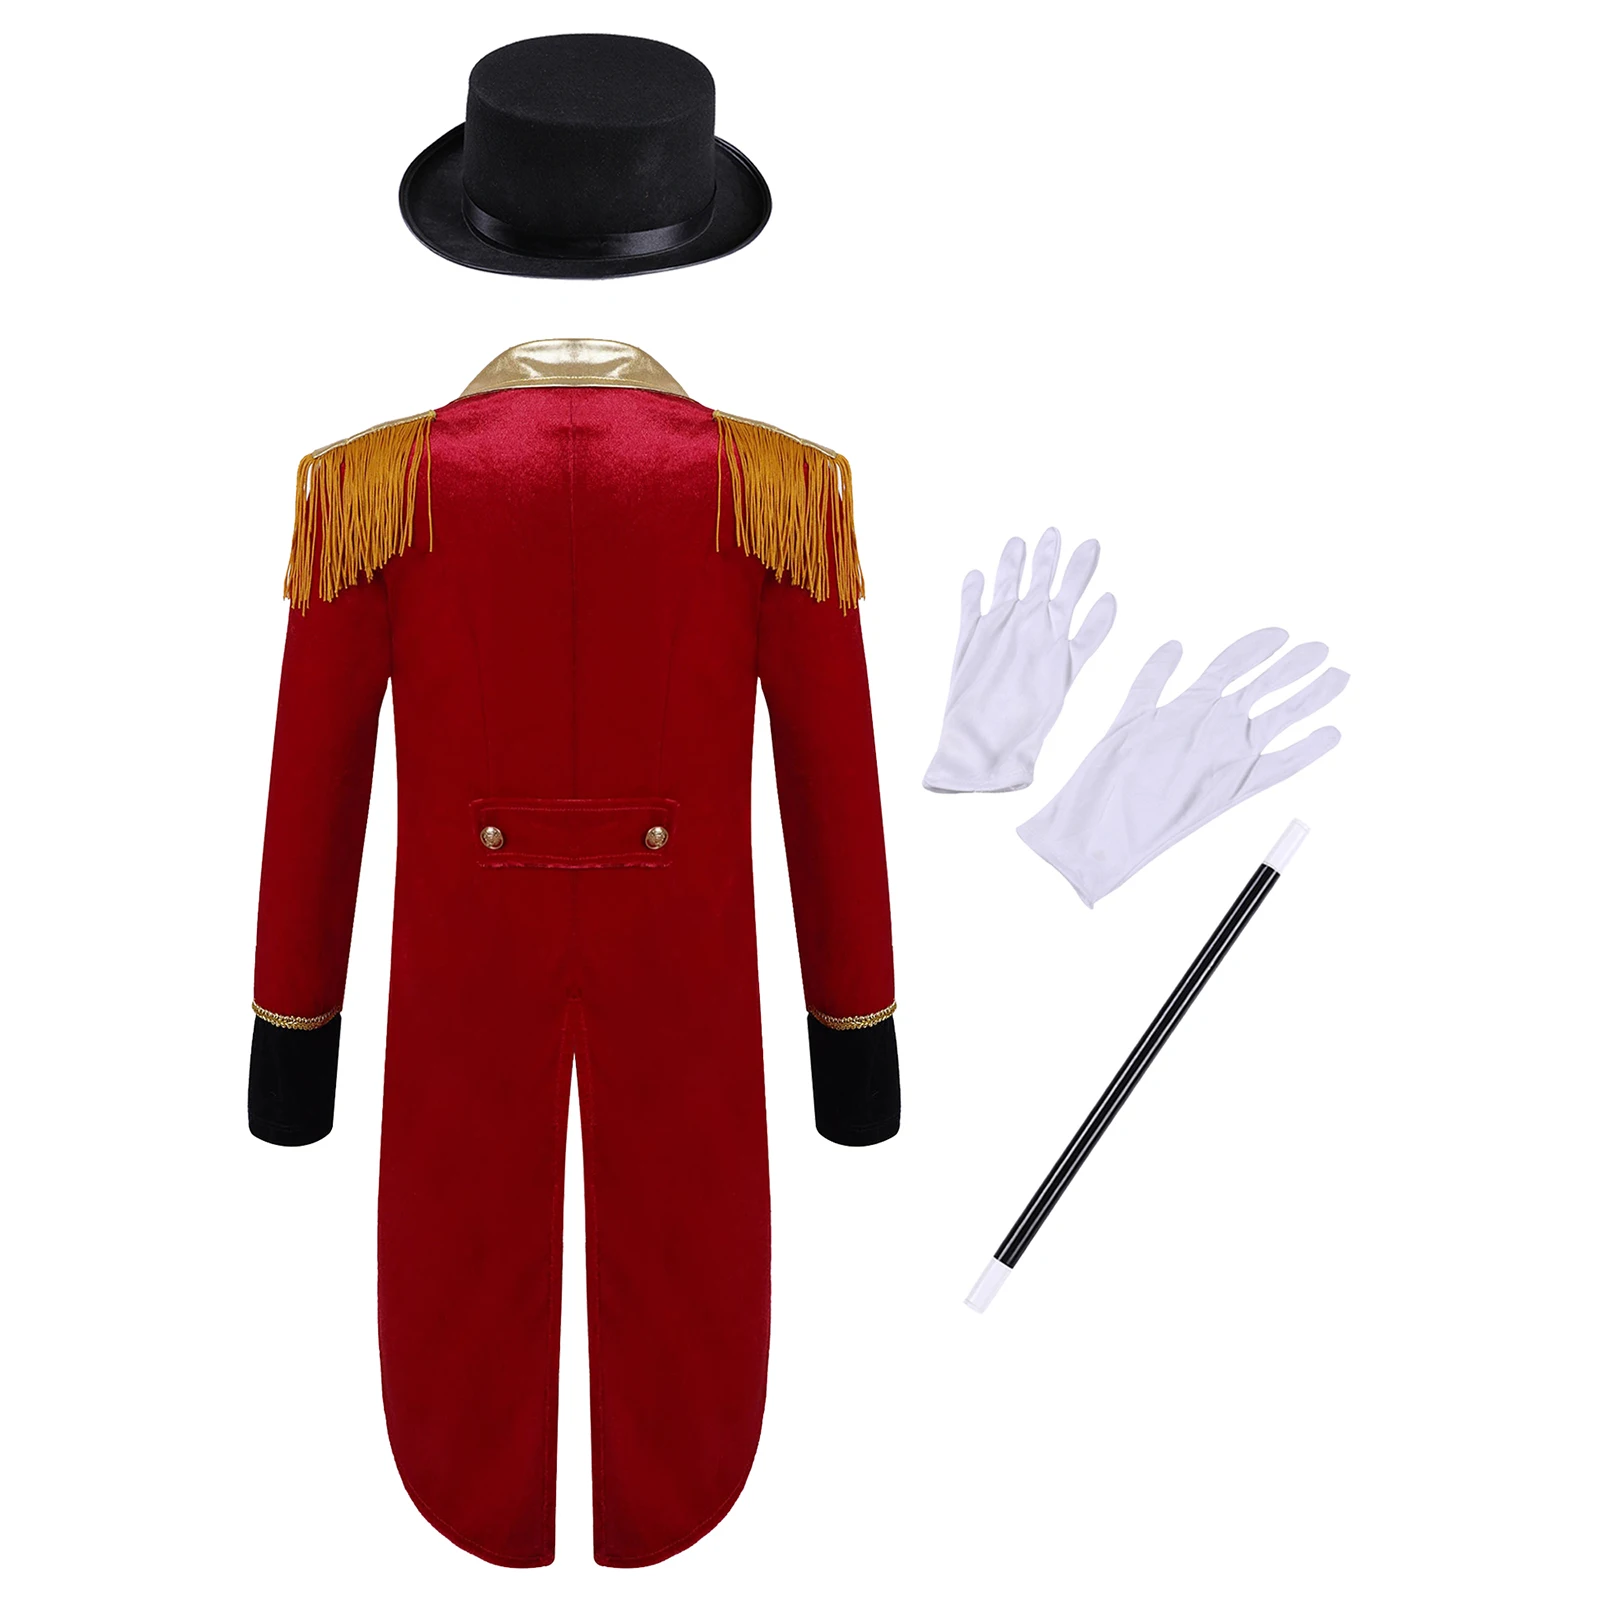 Kids Boys Circus Costume Set Long Sleeve Lapel Tassel Shoulder Tailcoat with Hat Magic Wand Gloves for Halloween Cosplay